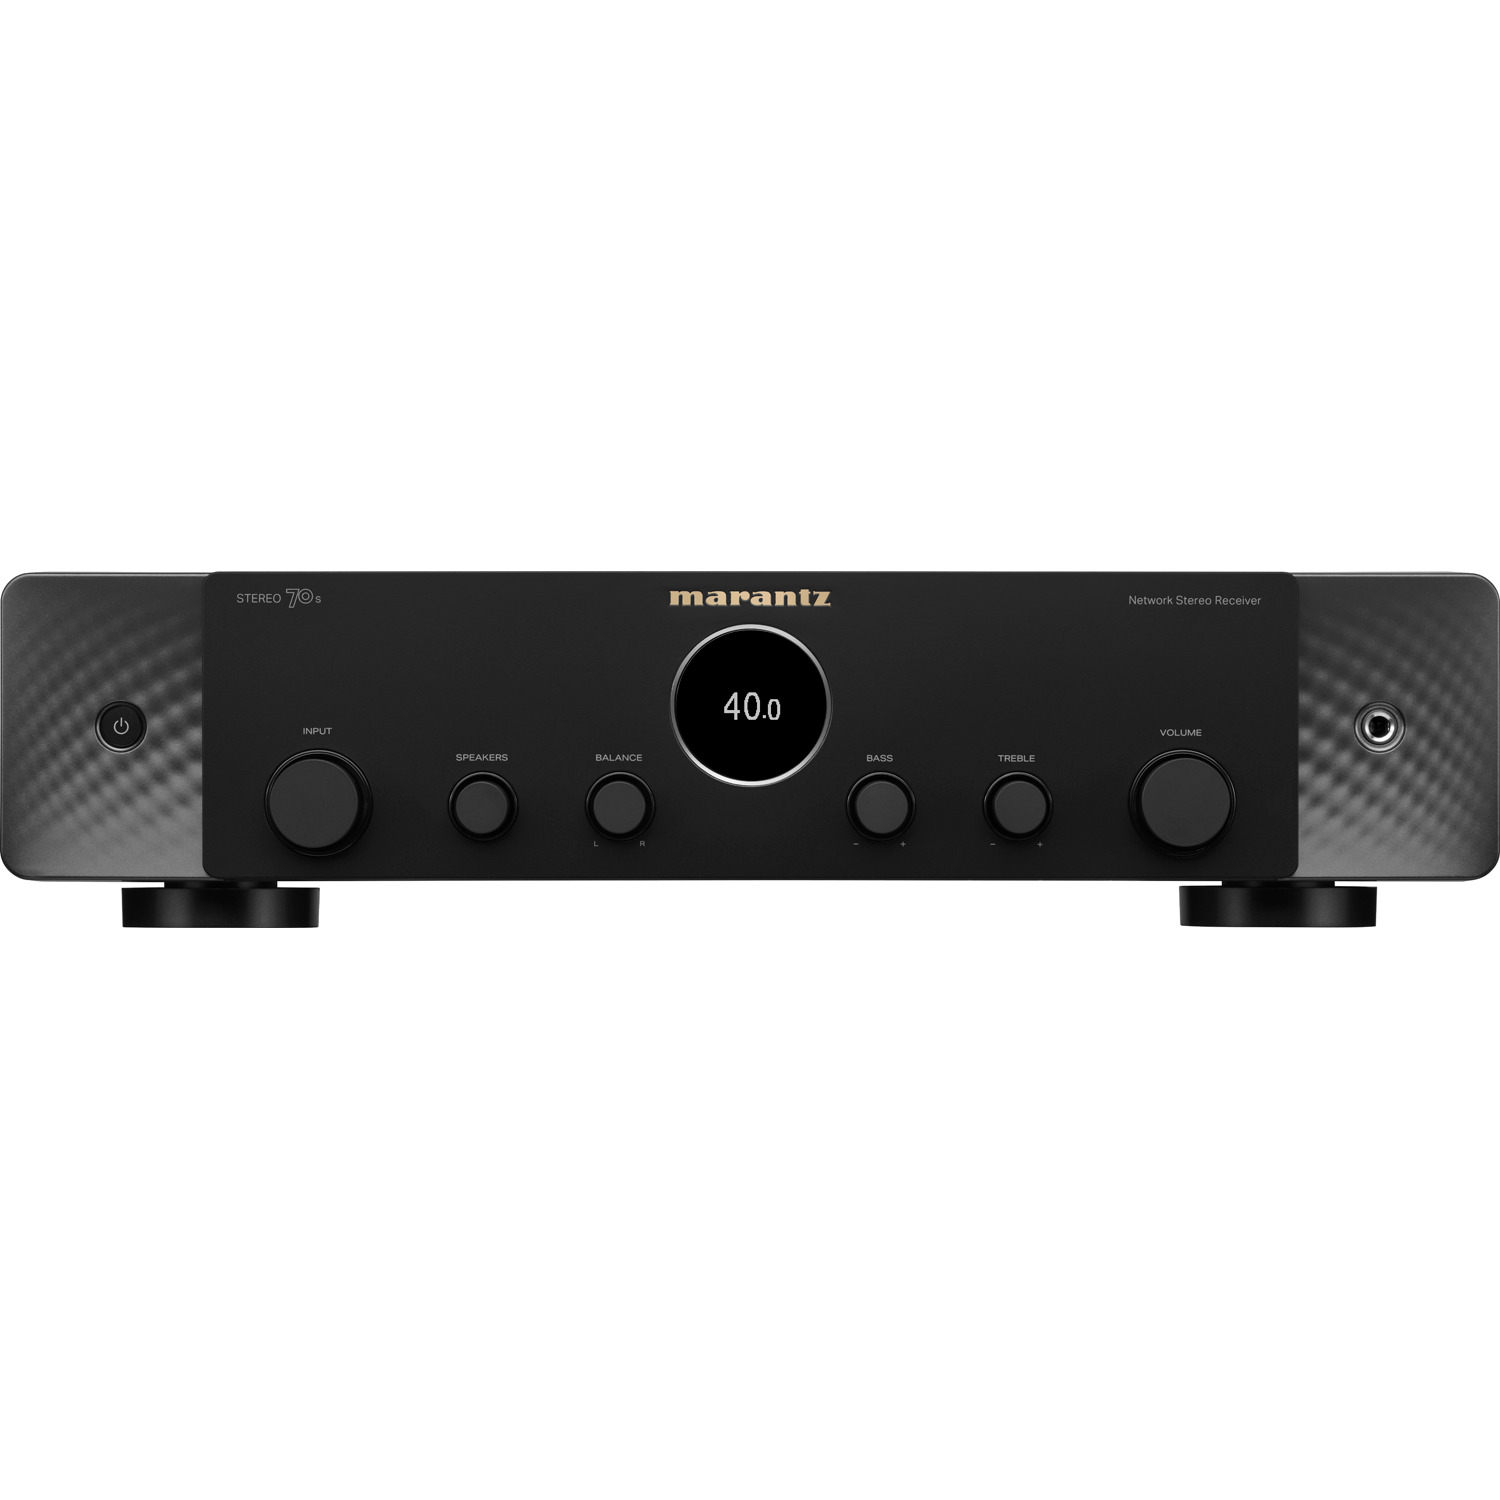 MARANTZ Stereo 70s 2.1-Channel Network A/V Receiver | Accessories4less